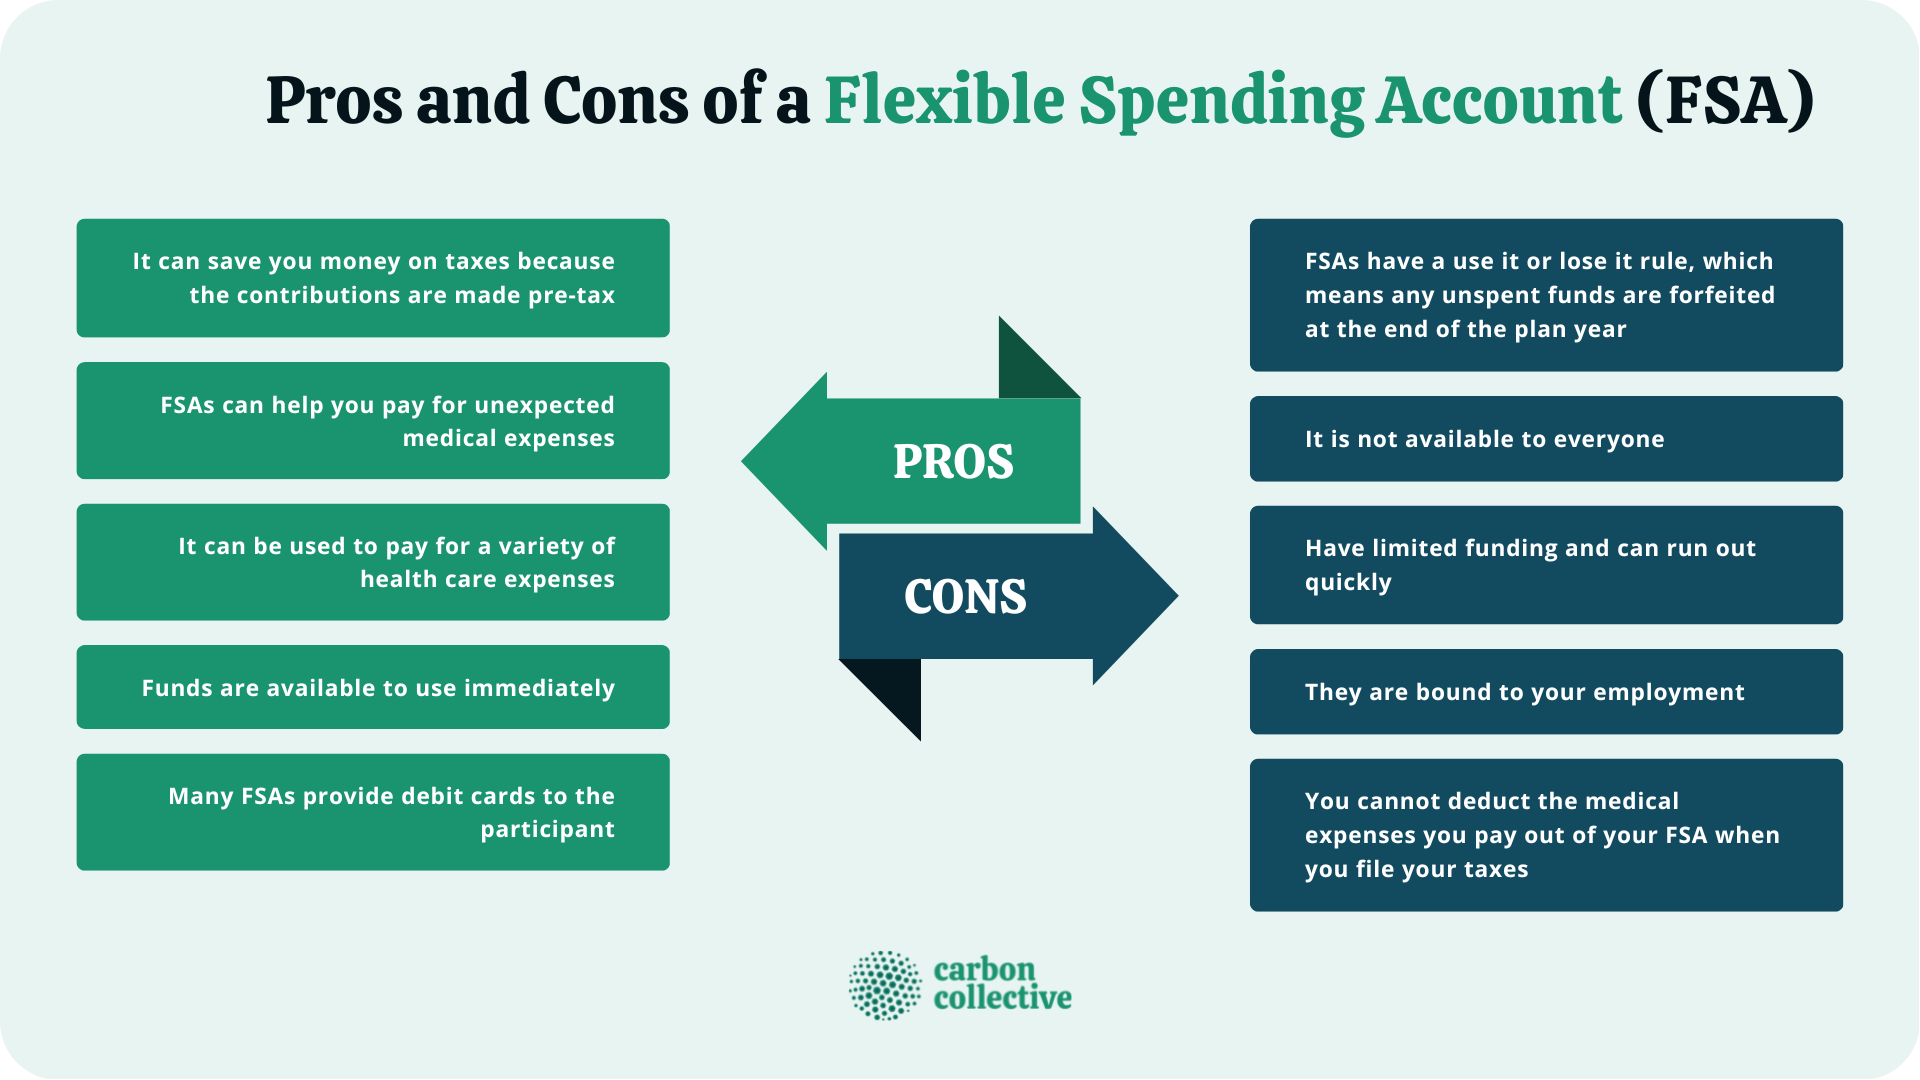 What Is a Flexible Spending Account (FSA)?